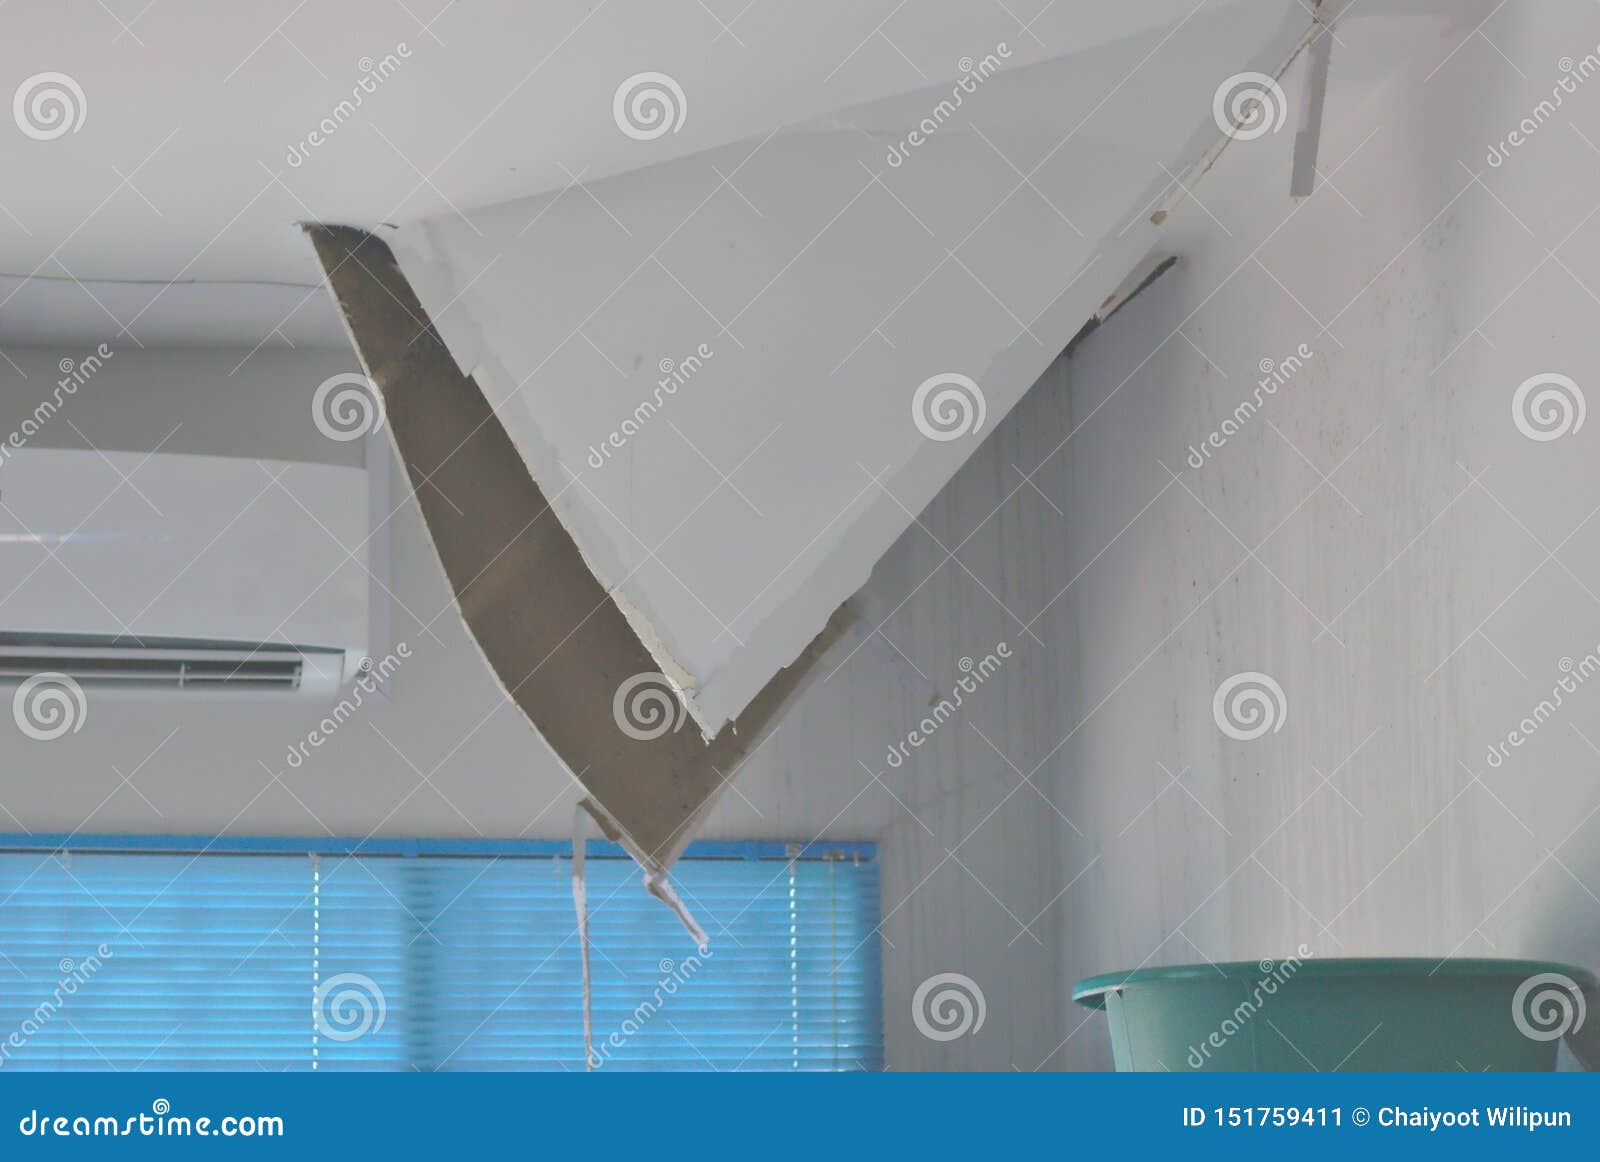 The Ceiling Is Broken The Gypsum Board Is Damaged Dropped